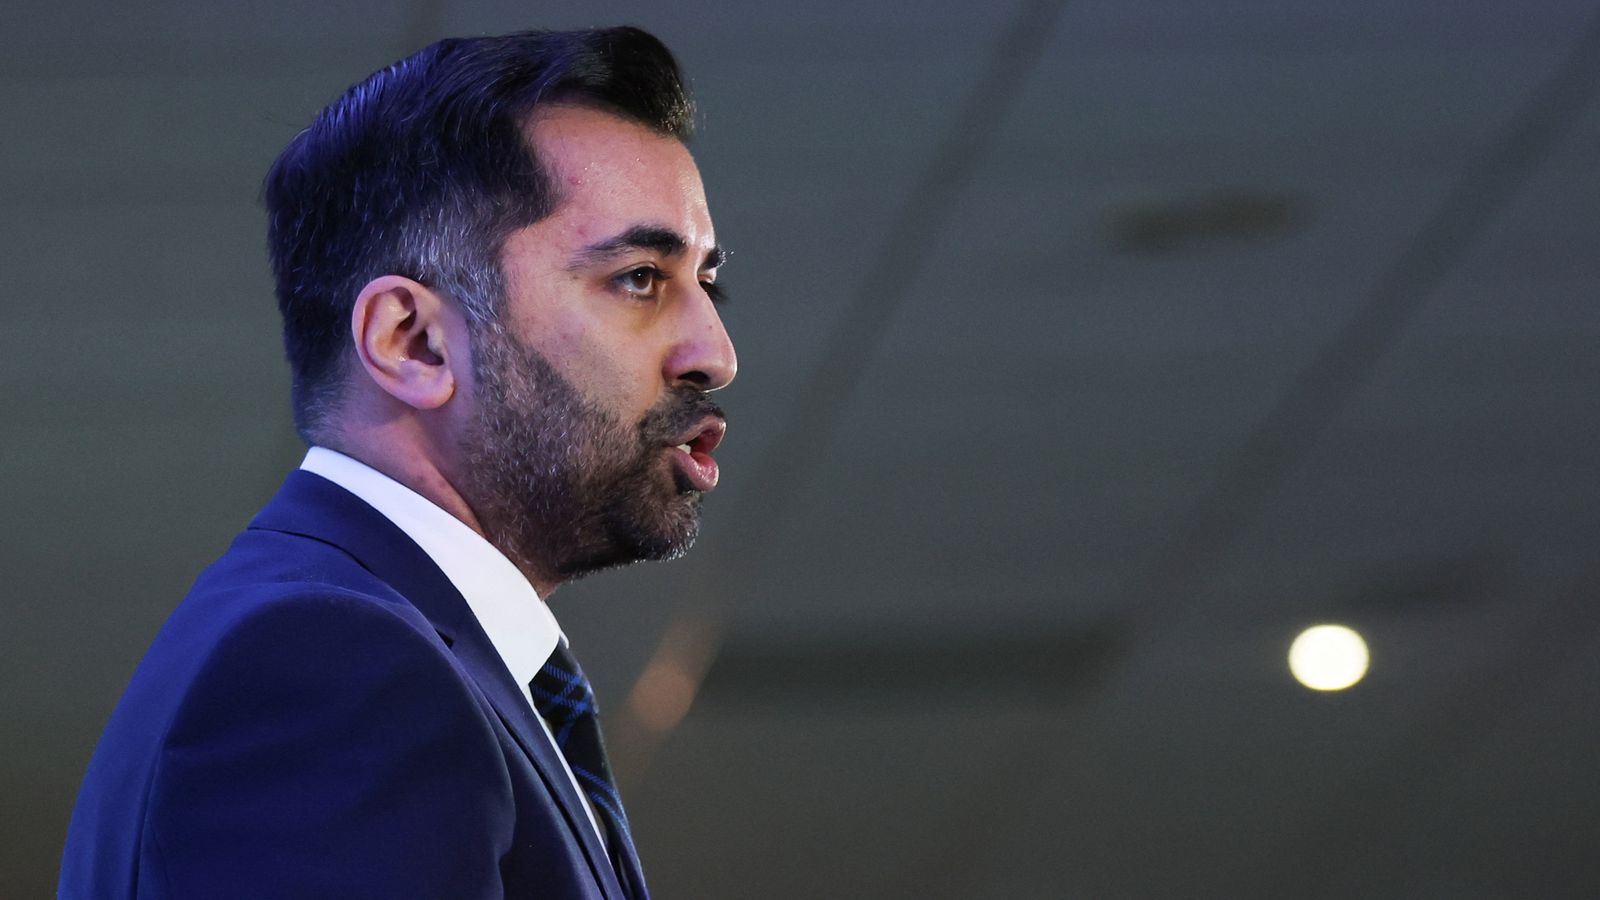 Humza Yousaf elected by MSPs as Scotland's new first minister